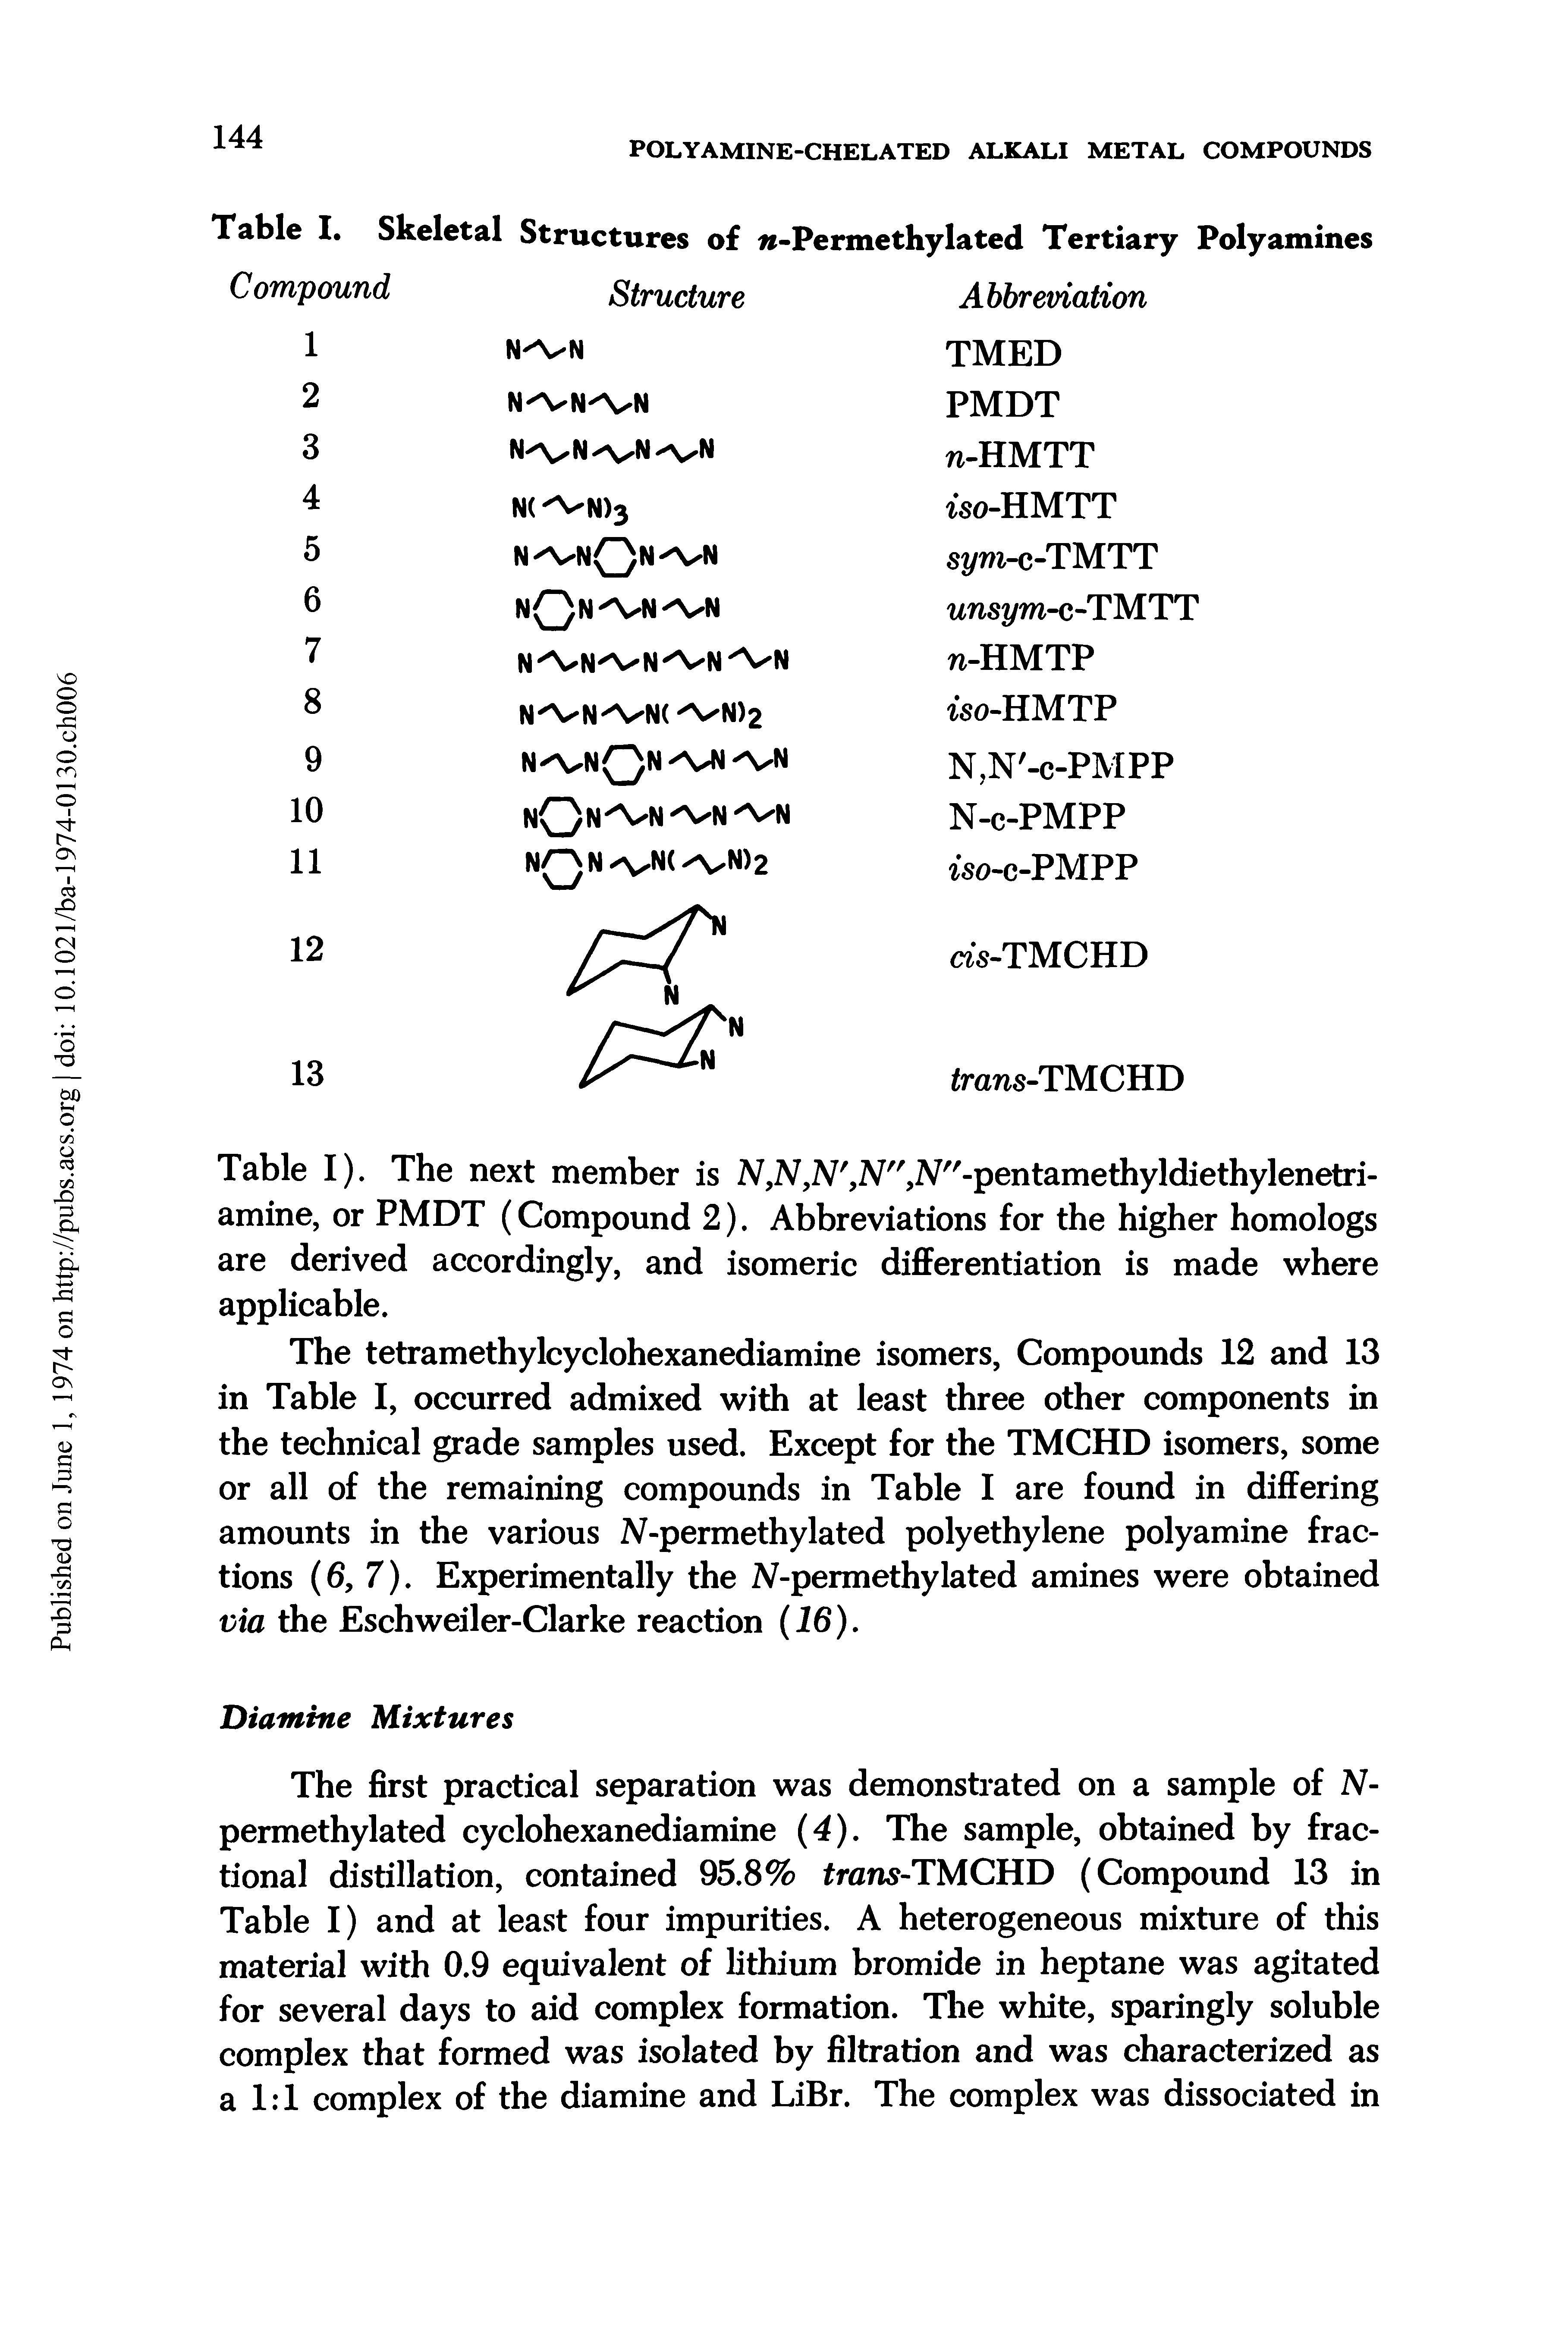 Table I). The next member is 2V,N,N, 2V",2V"-pentamethyldiethylenetri-amine, or PMDT (Compound 2). Abbreviations for the higher homologs are derived accordingly, and isomeric differentiation is made where applicable.